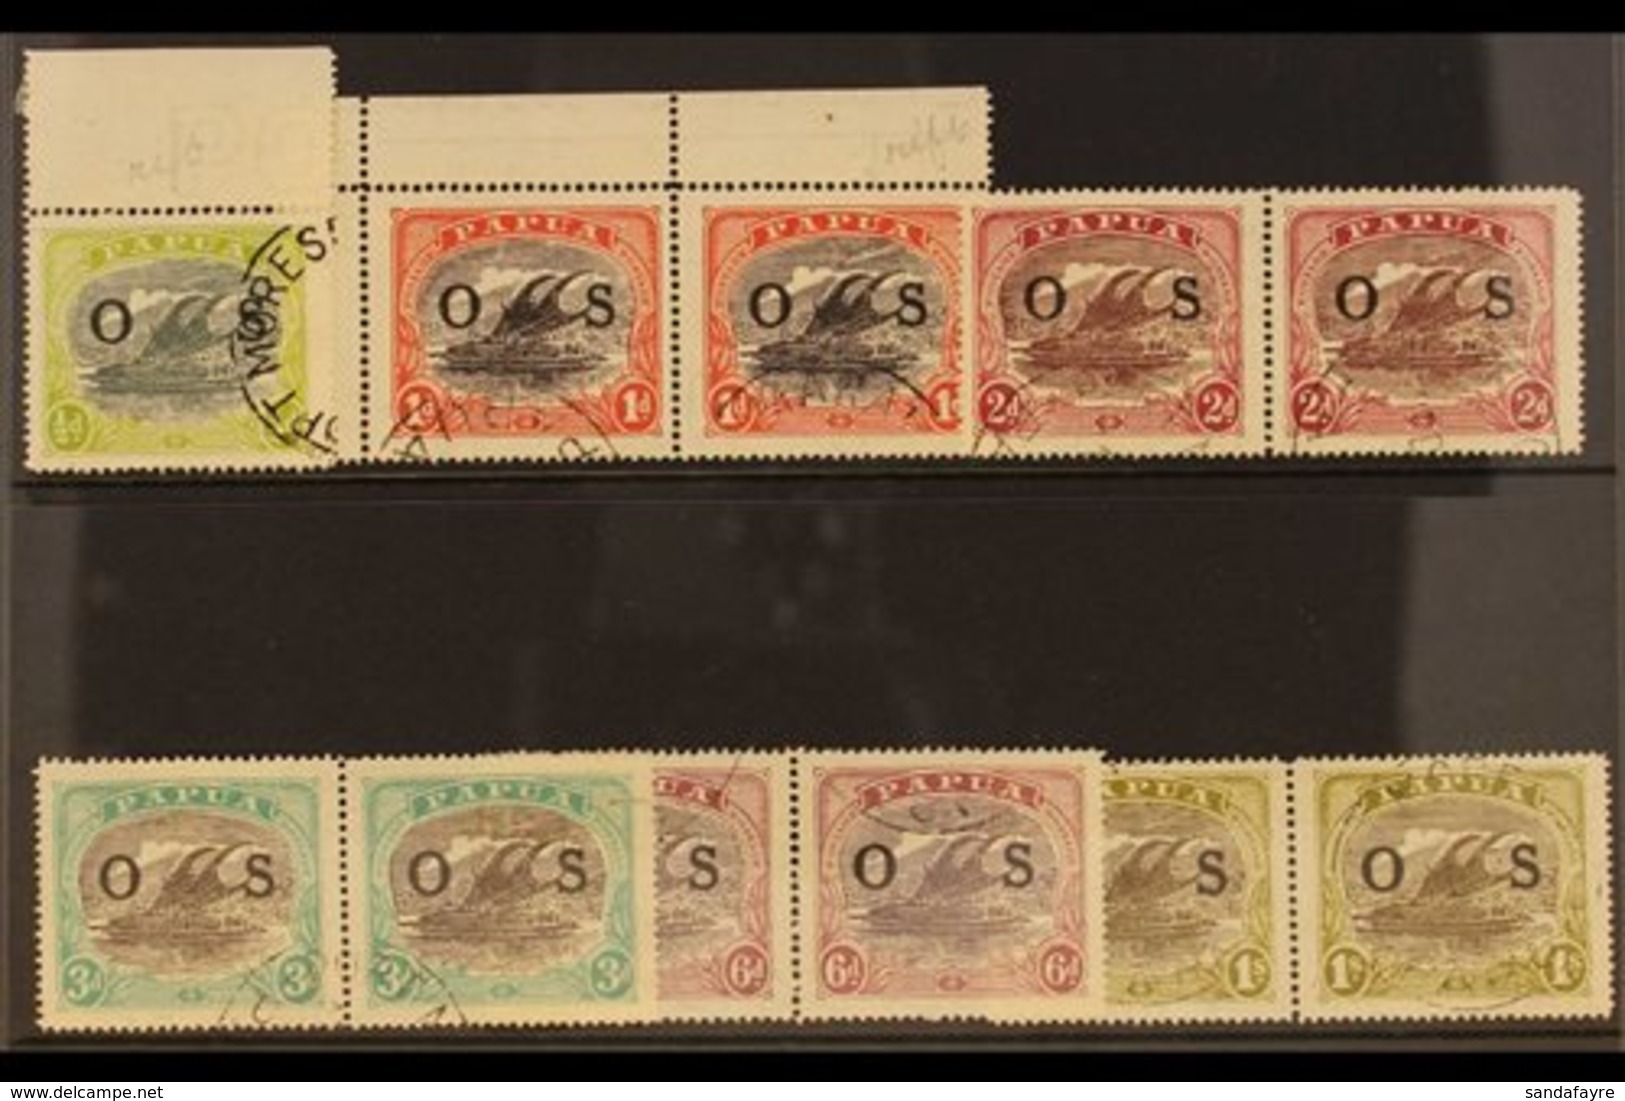 OFFICIALS WITH "RIFT IN CLOUD" FLAW 1931-32. VARIETIES. An "O S" Overprinted Fine Used Range Bearing "RIFT IN CLOUD"  Va - Papoea-Nieuw-Guinea